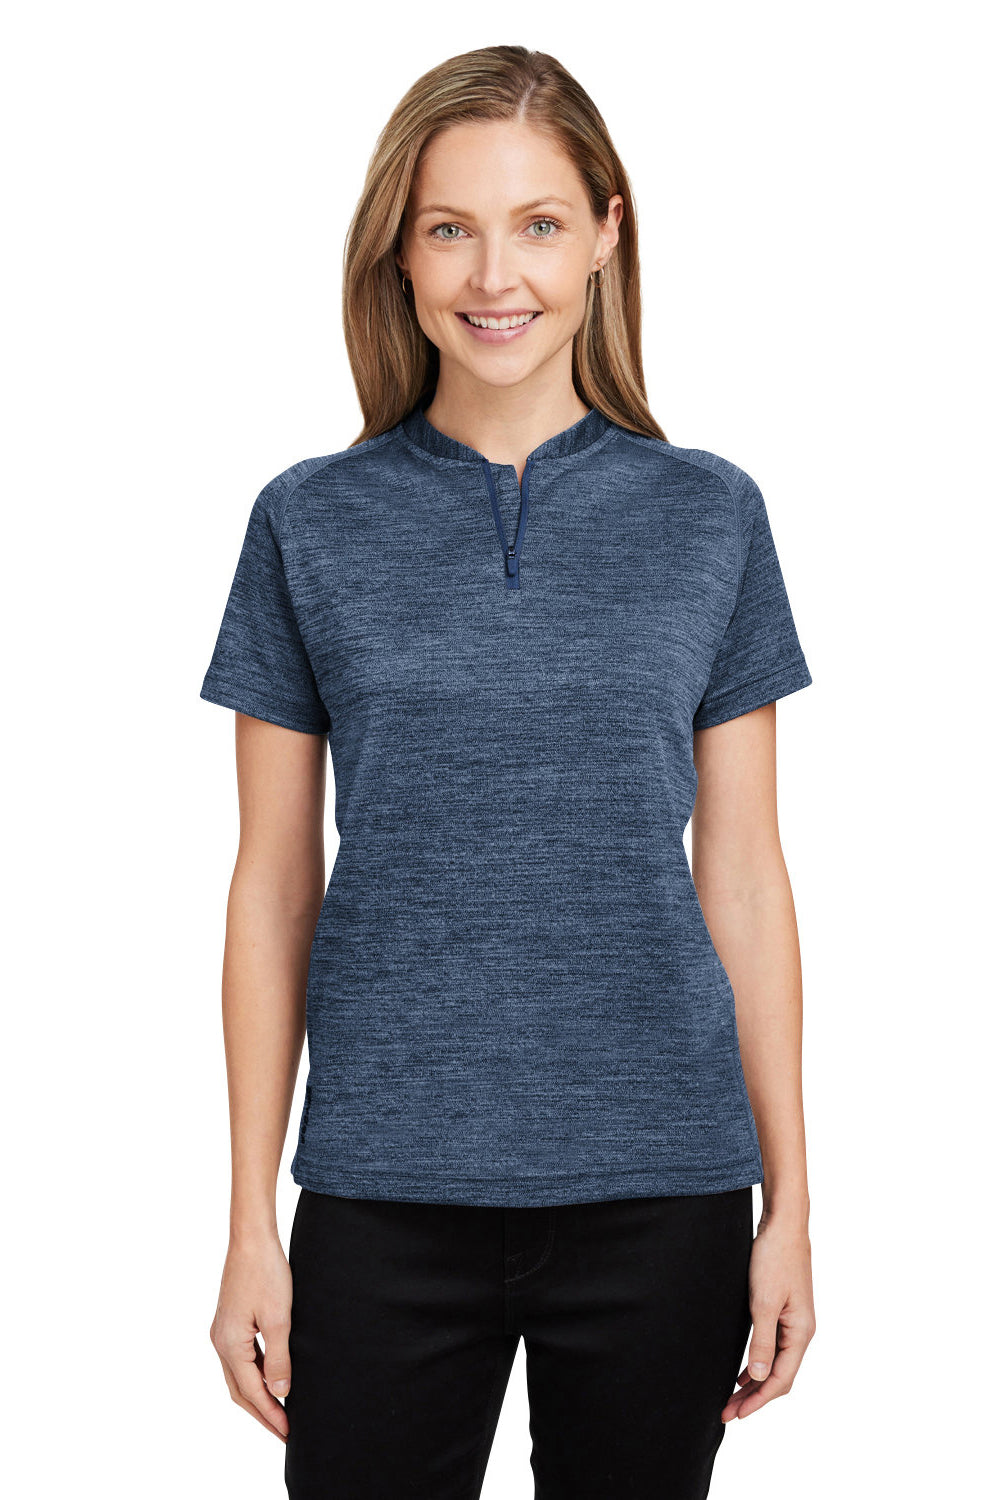 Spyder S17980 Womens Mission Blade Short Sleeve Polo Shirt Frontier Blue Front